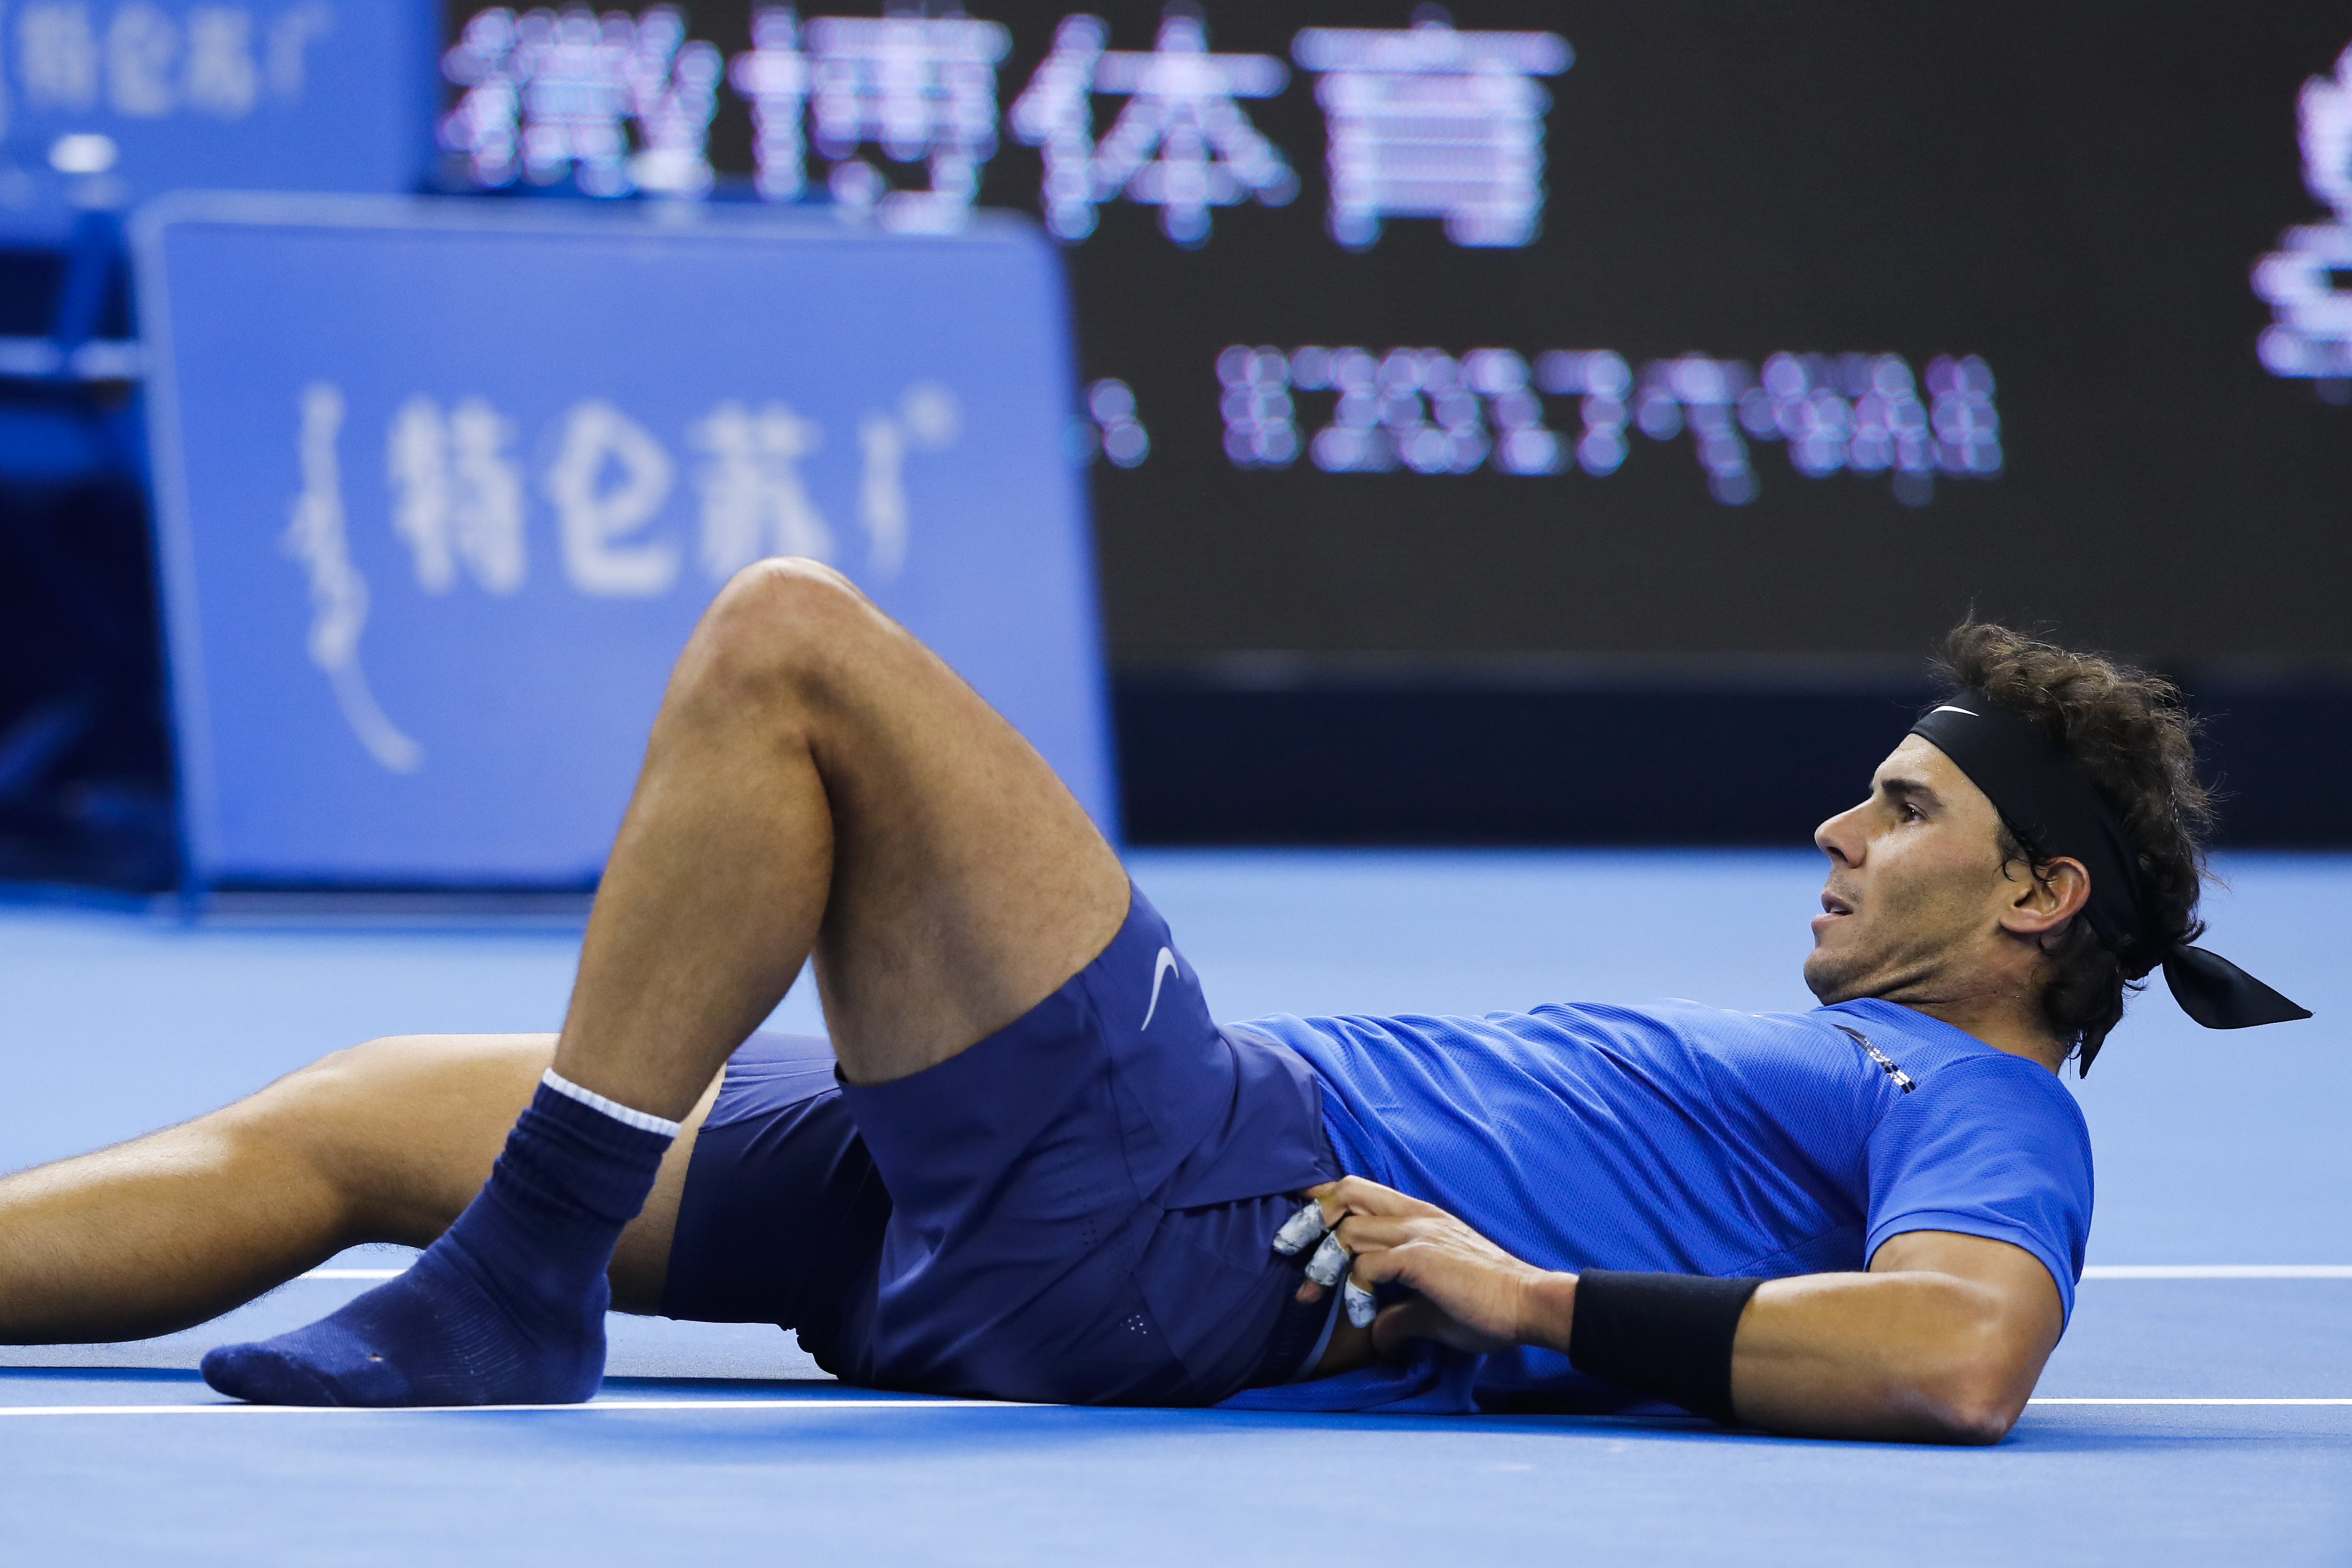 Nadal saves 2 match points, advances at China Open